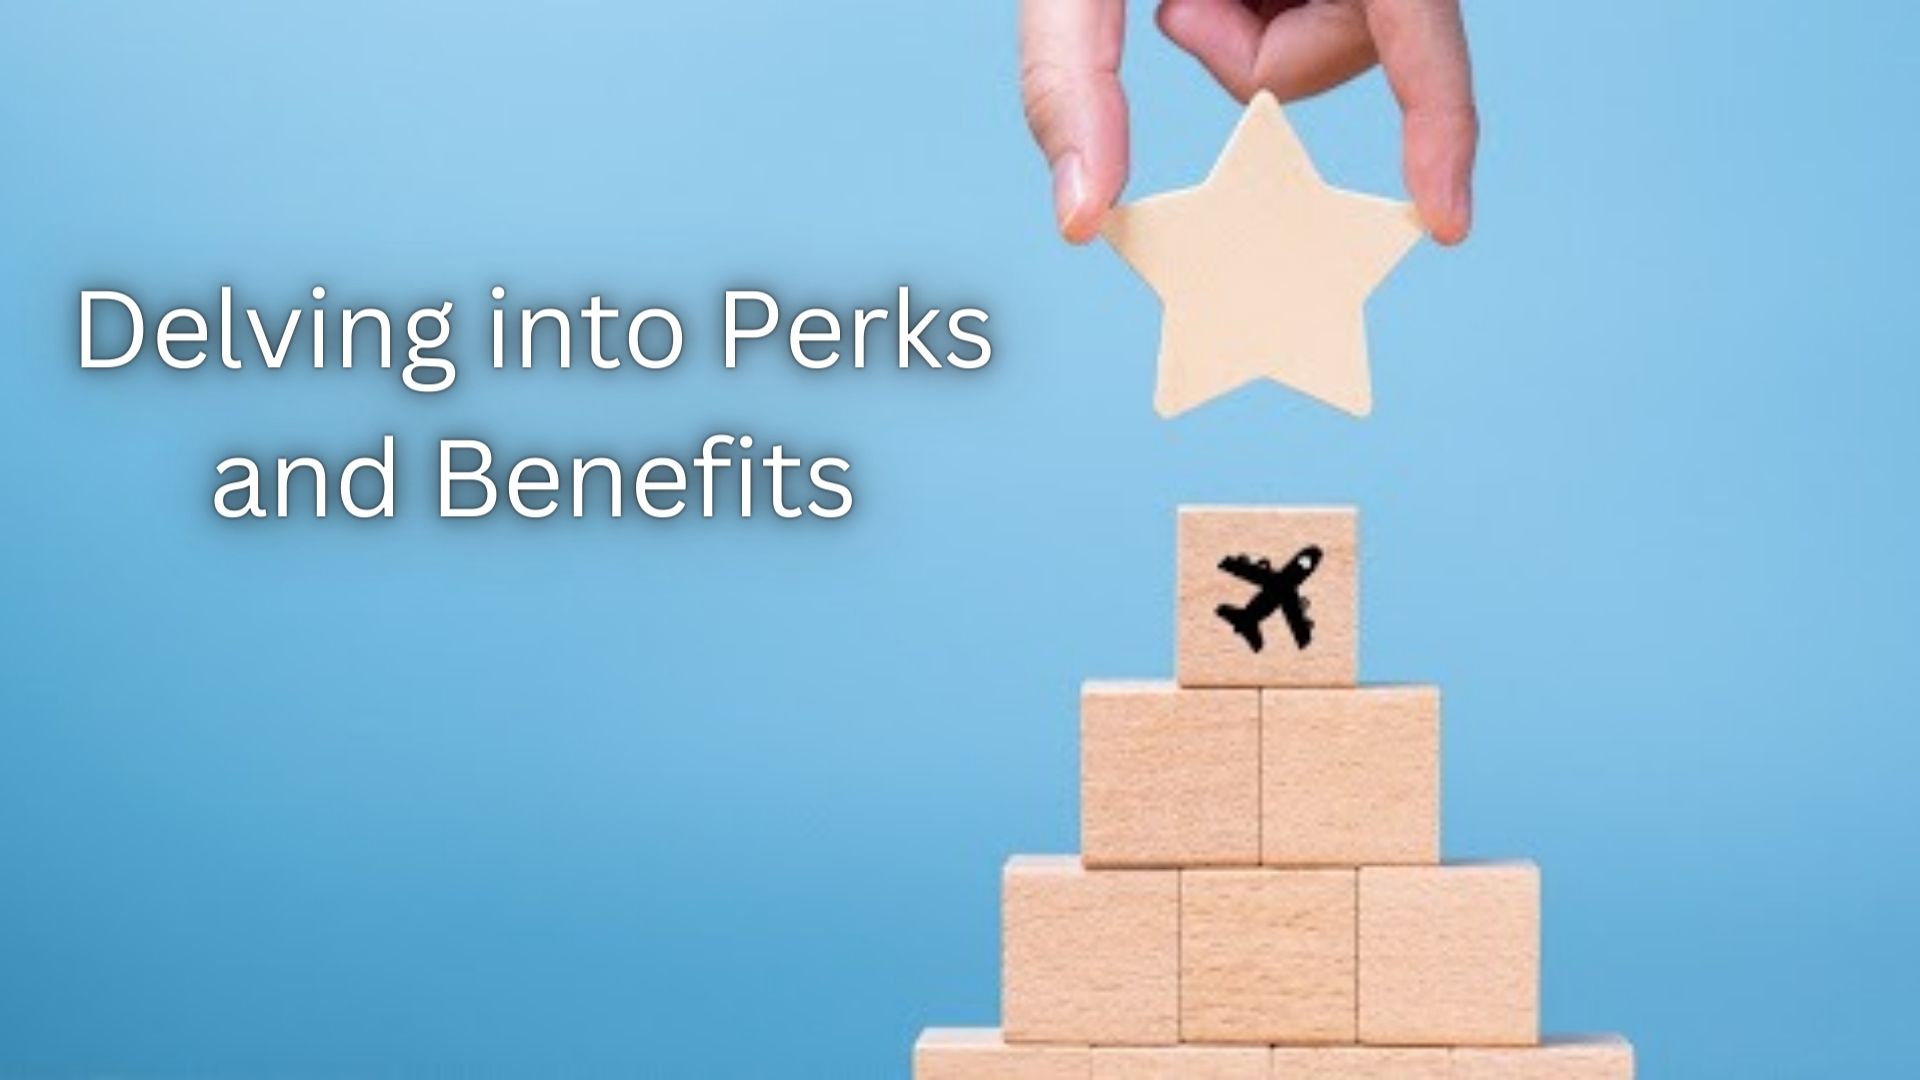 Delving into Perks and Benefits.